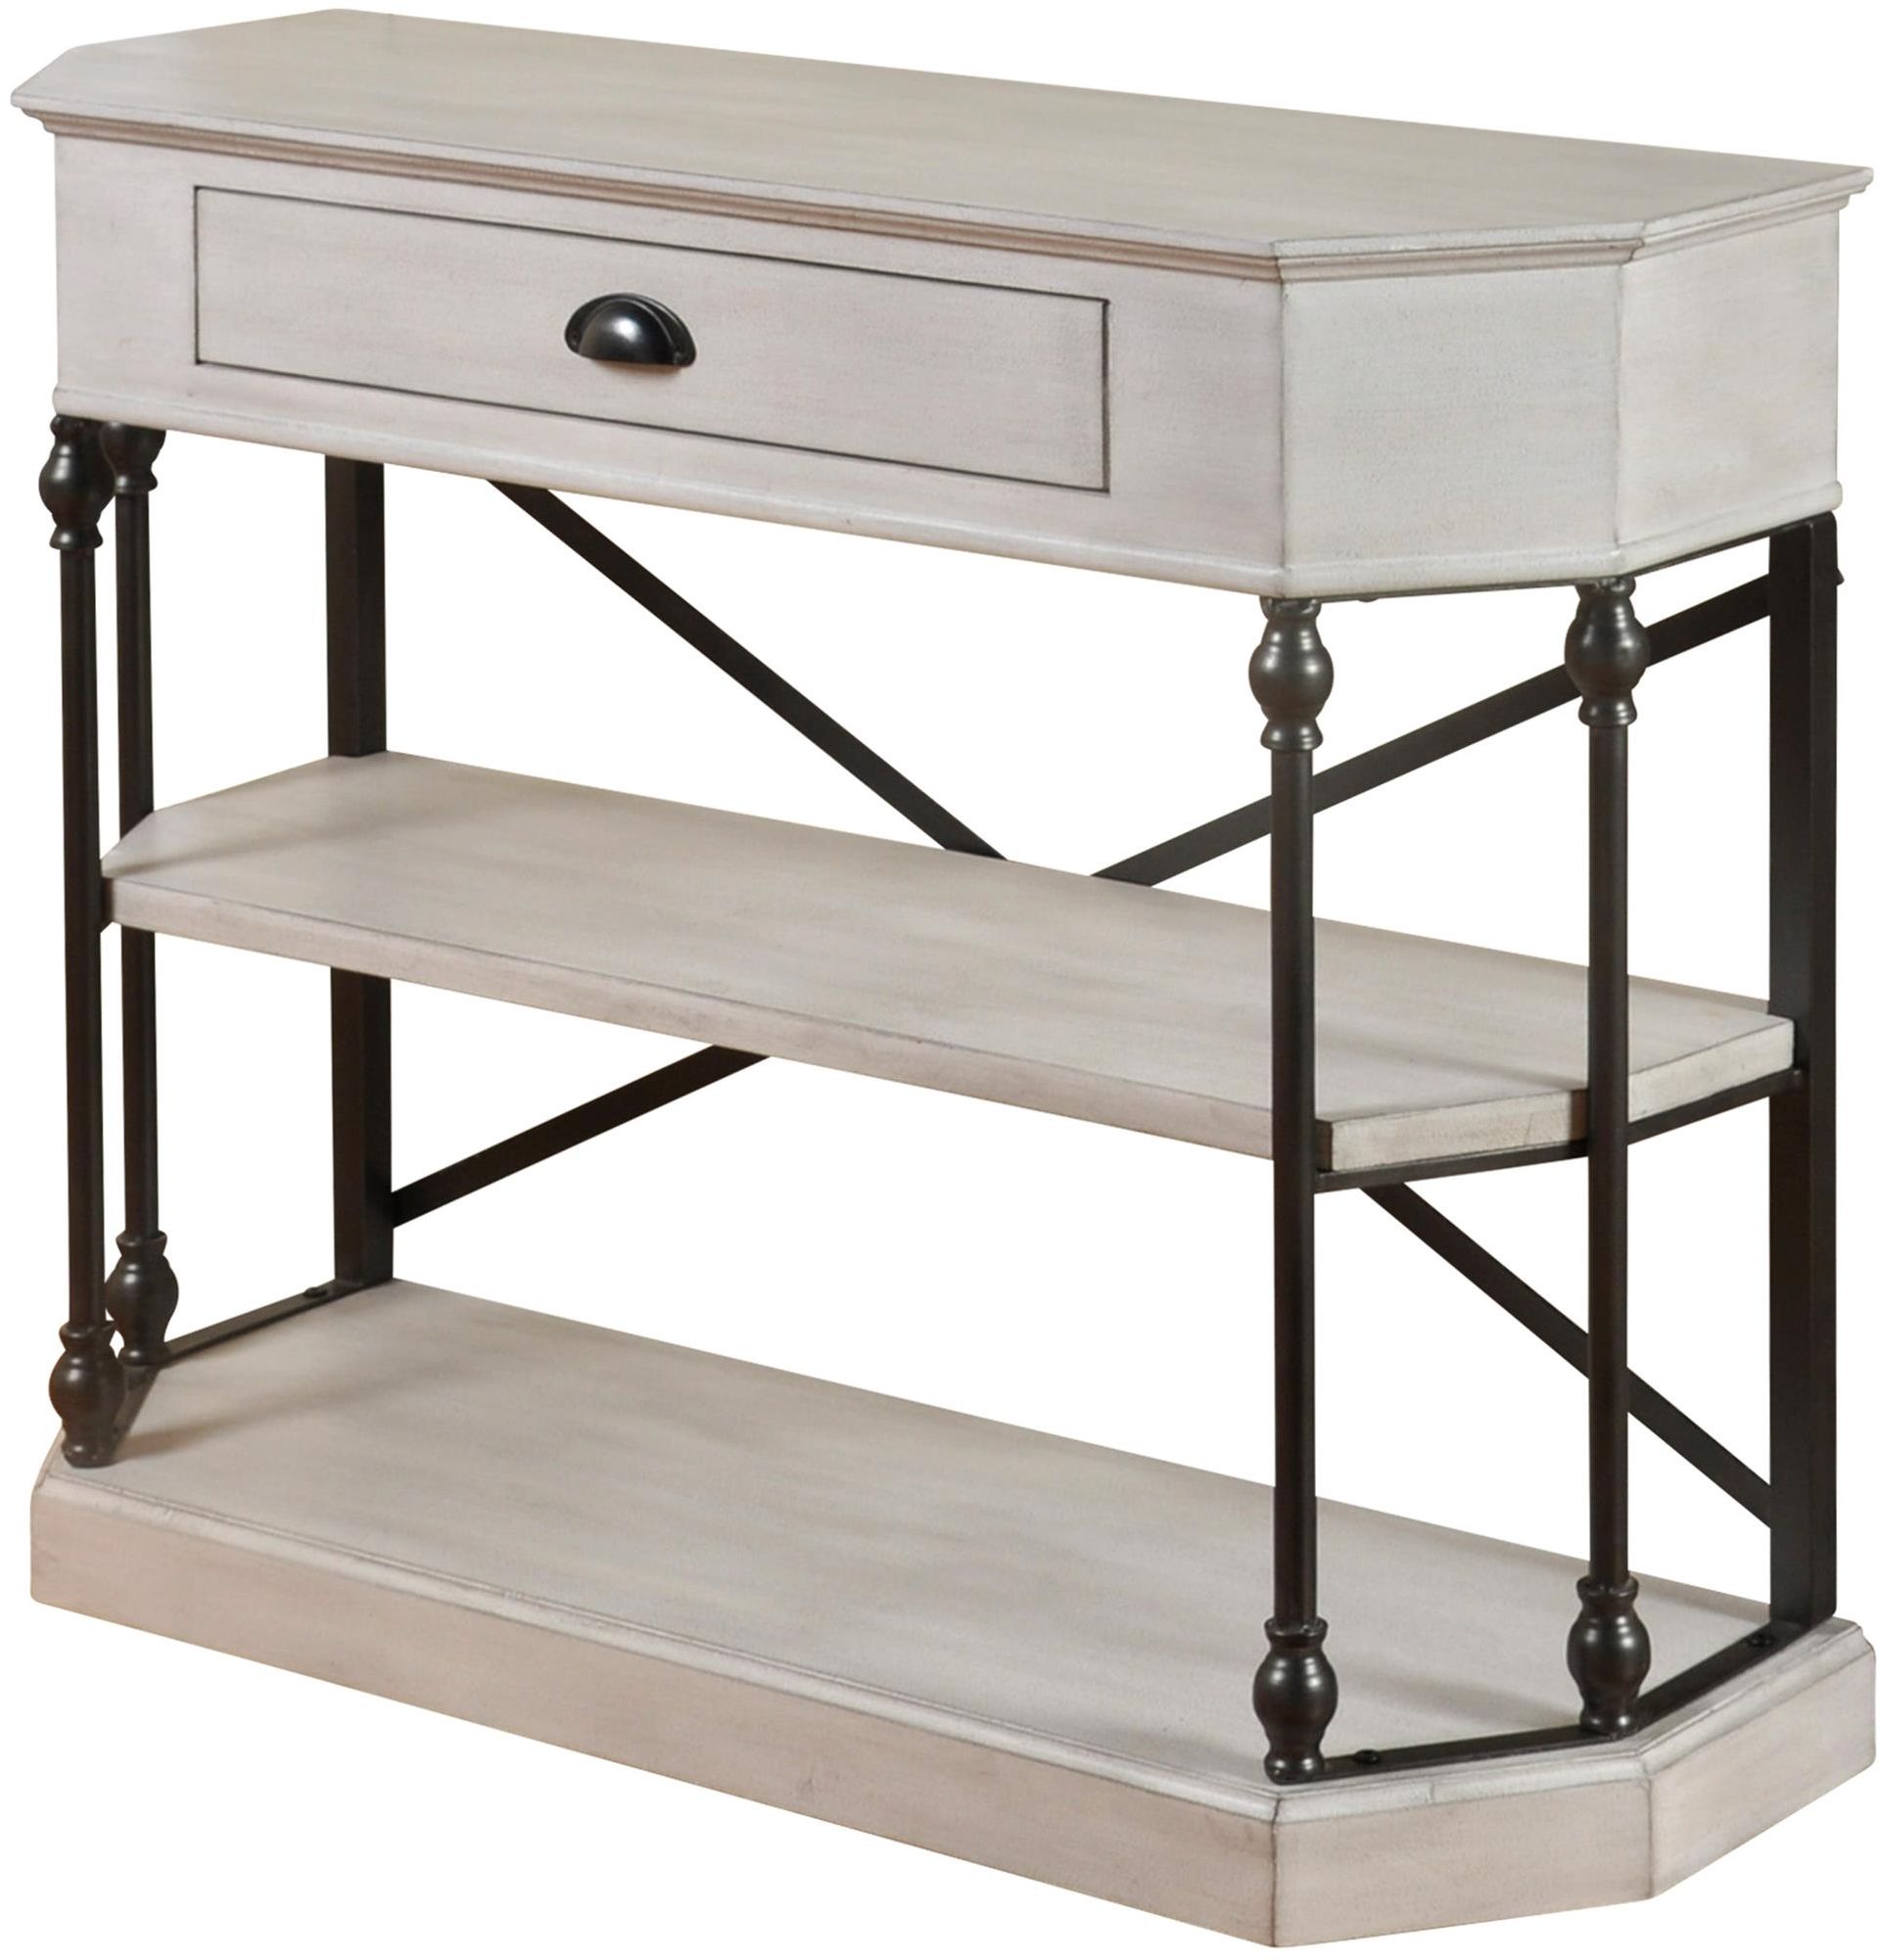 StyleCraft Clipped Corner Console Table